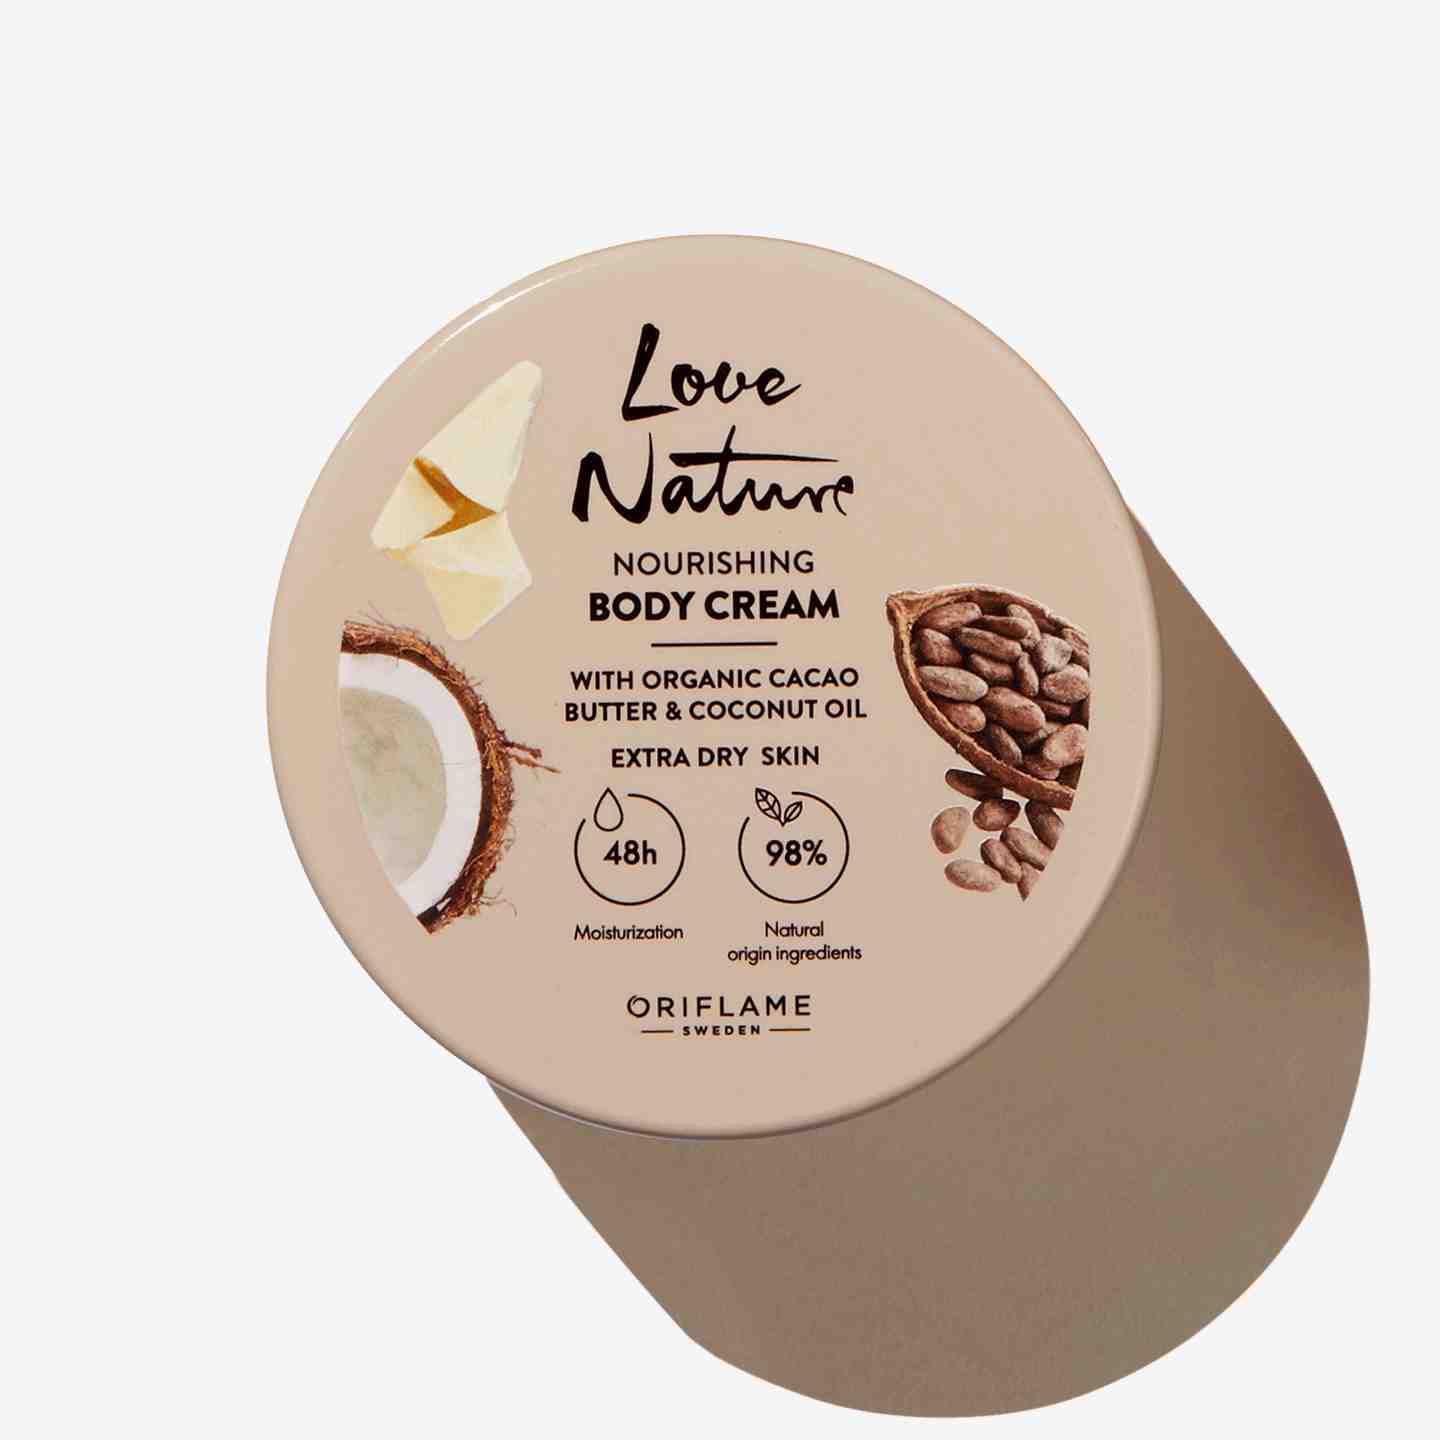 Nourishing Body Cream with Organic Cacao Butter & Coconut Oil